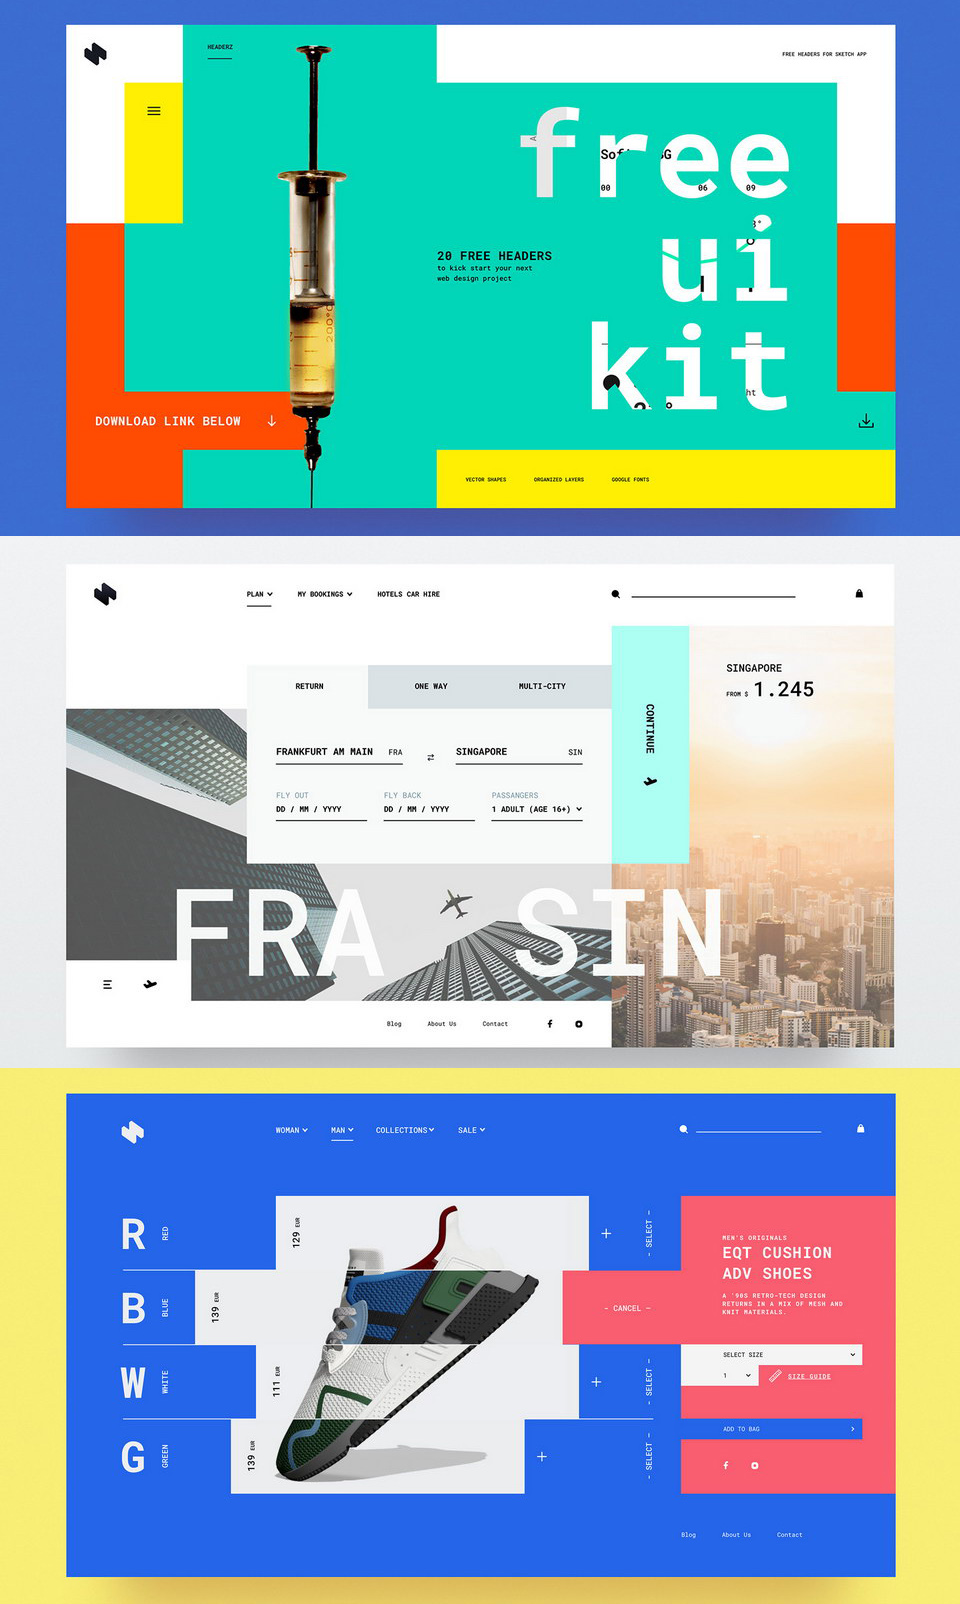 12 Best Free Material Design UI Kits for Sketch  PSD in 2018  by Vincent  Xia  Medium